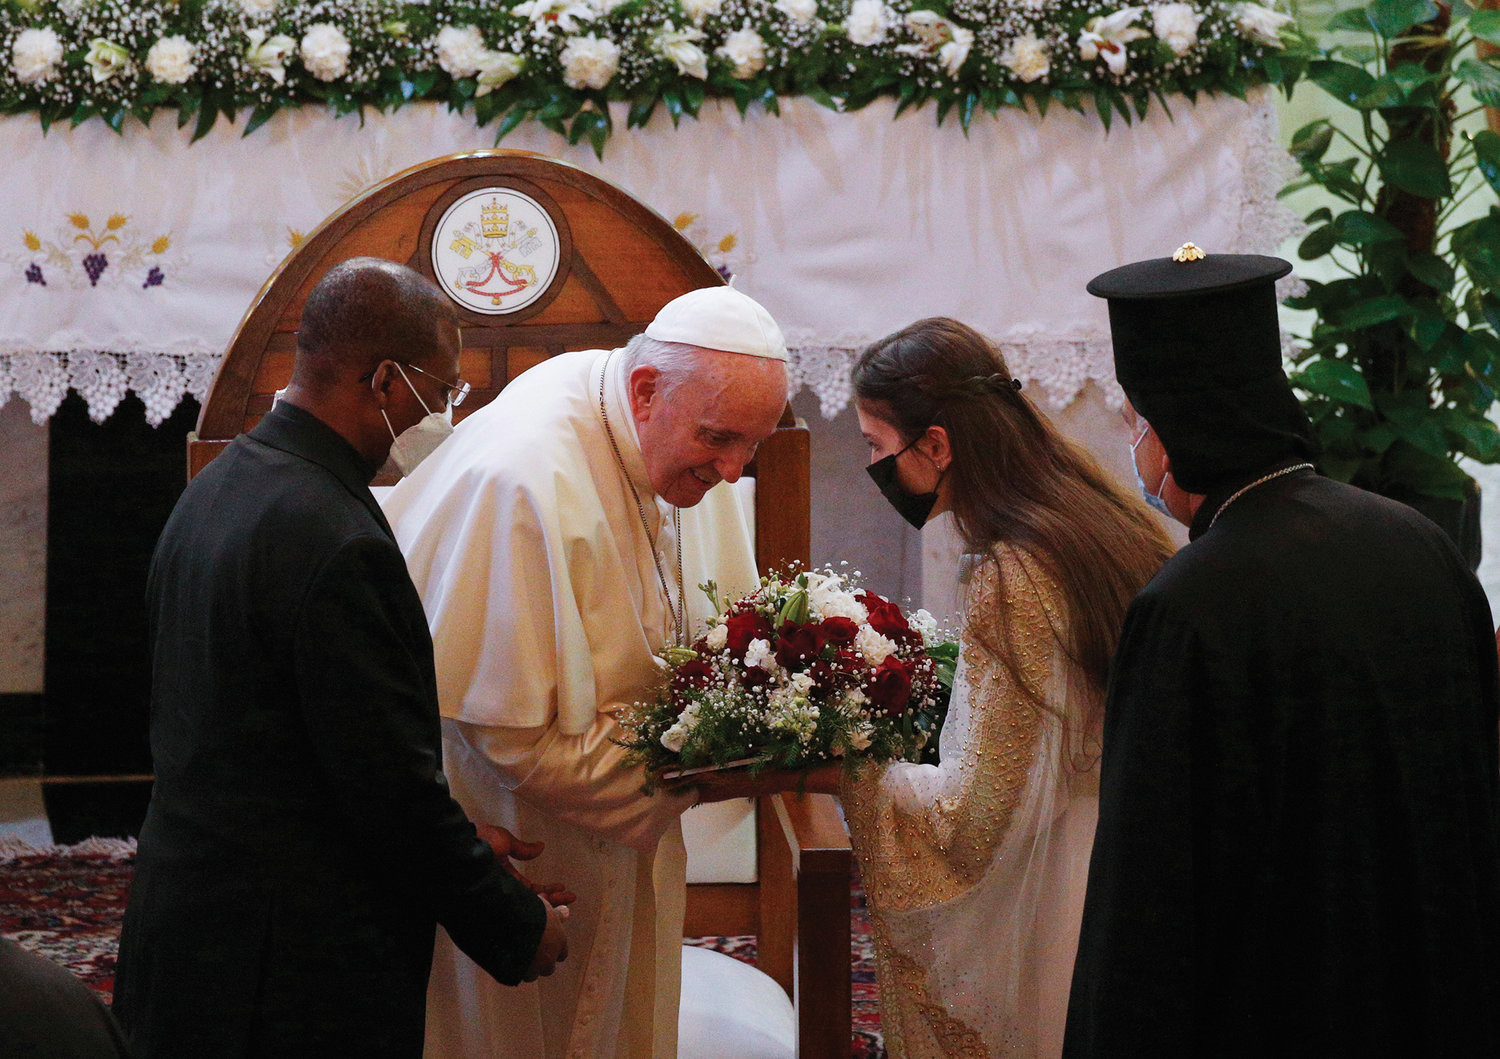 Pope Francis accepts flowers during a meeting with bishops, priests, religious men and women, seminarians and catechists in the Syriac Catholic Cathedral of Our Lady of Deliverance in Baghdad March 5. The Holy Father’s March 5-8 visit to Iraq was a first for a pontiff.